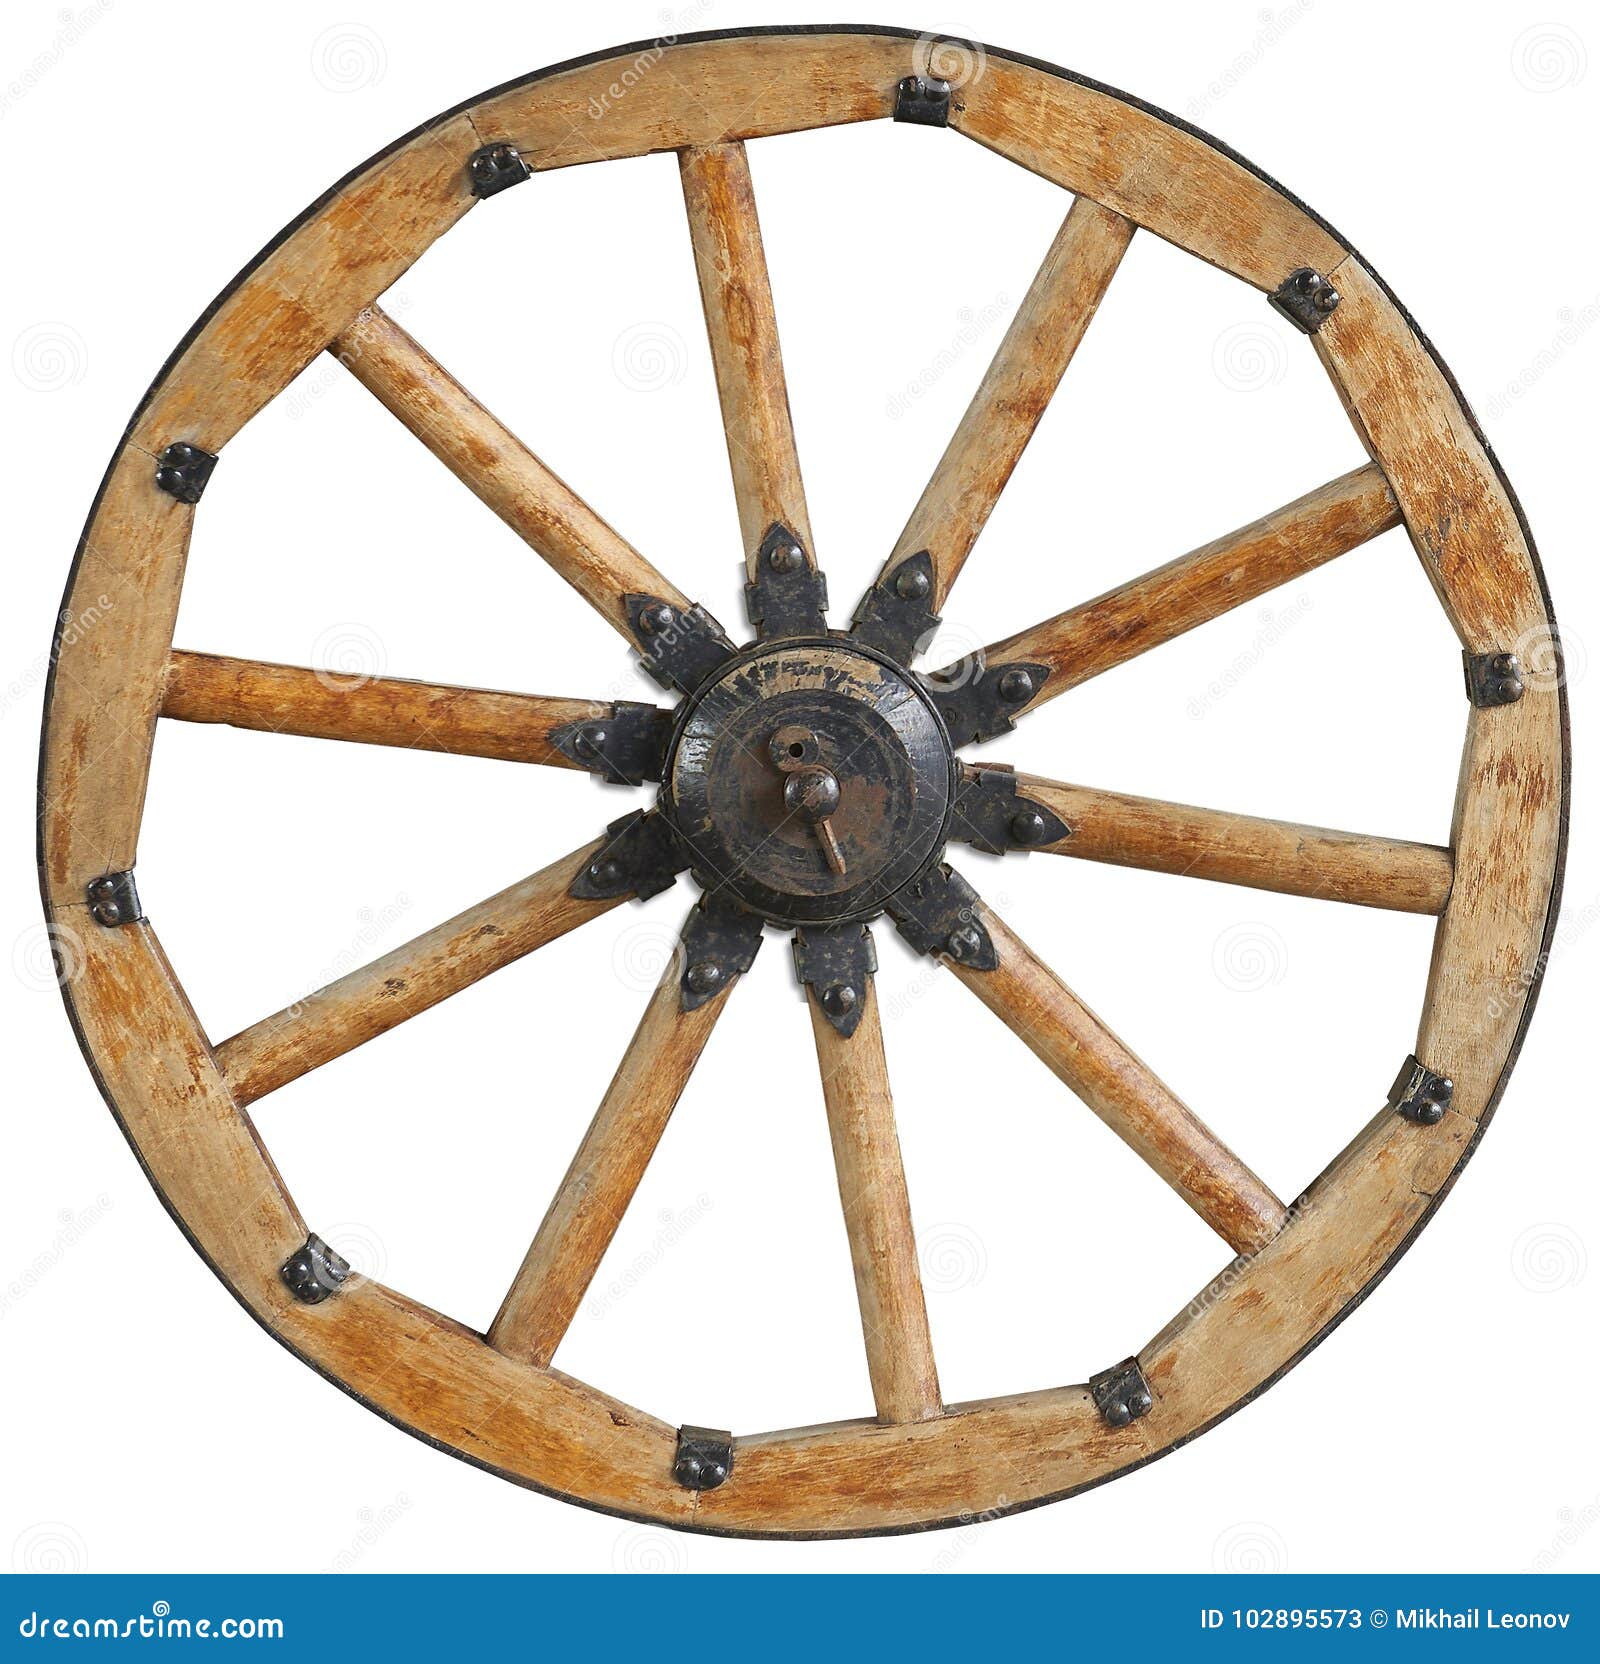 classic old antique wooden wagon wheel rim spoke with black metal brackets and rivets. traditional cannon wheel  on white.